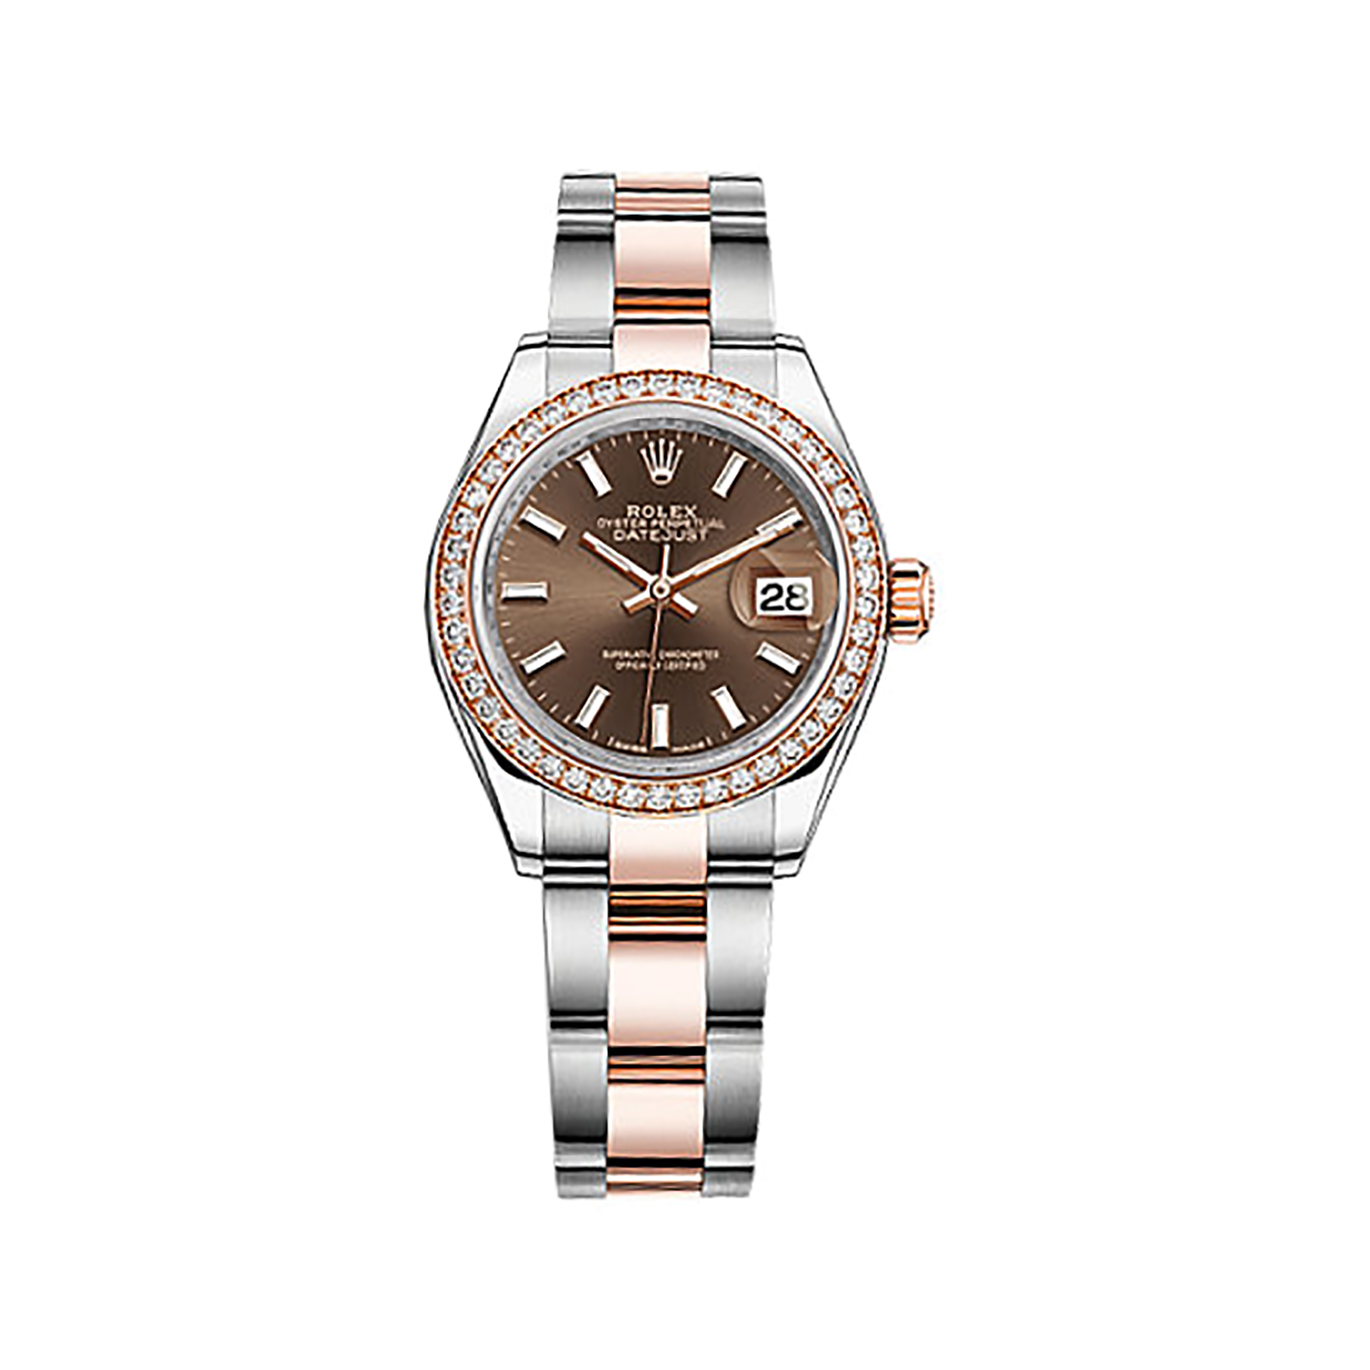 Lady-Datejust 28 279381RBR Rose Gold & Stainless Steel & Diamonds Watch (Chocolate)